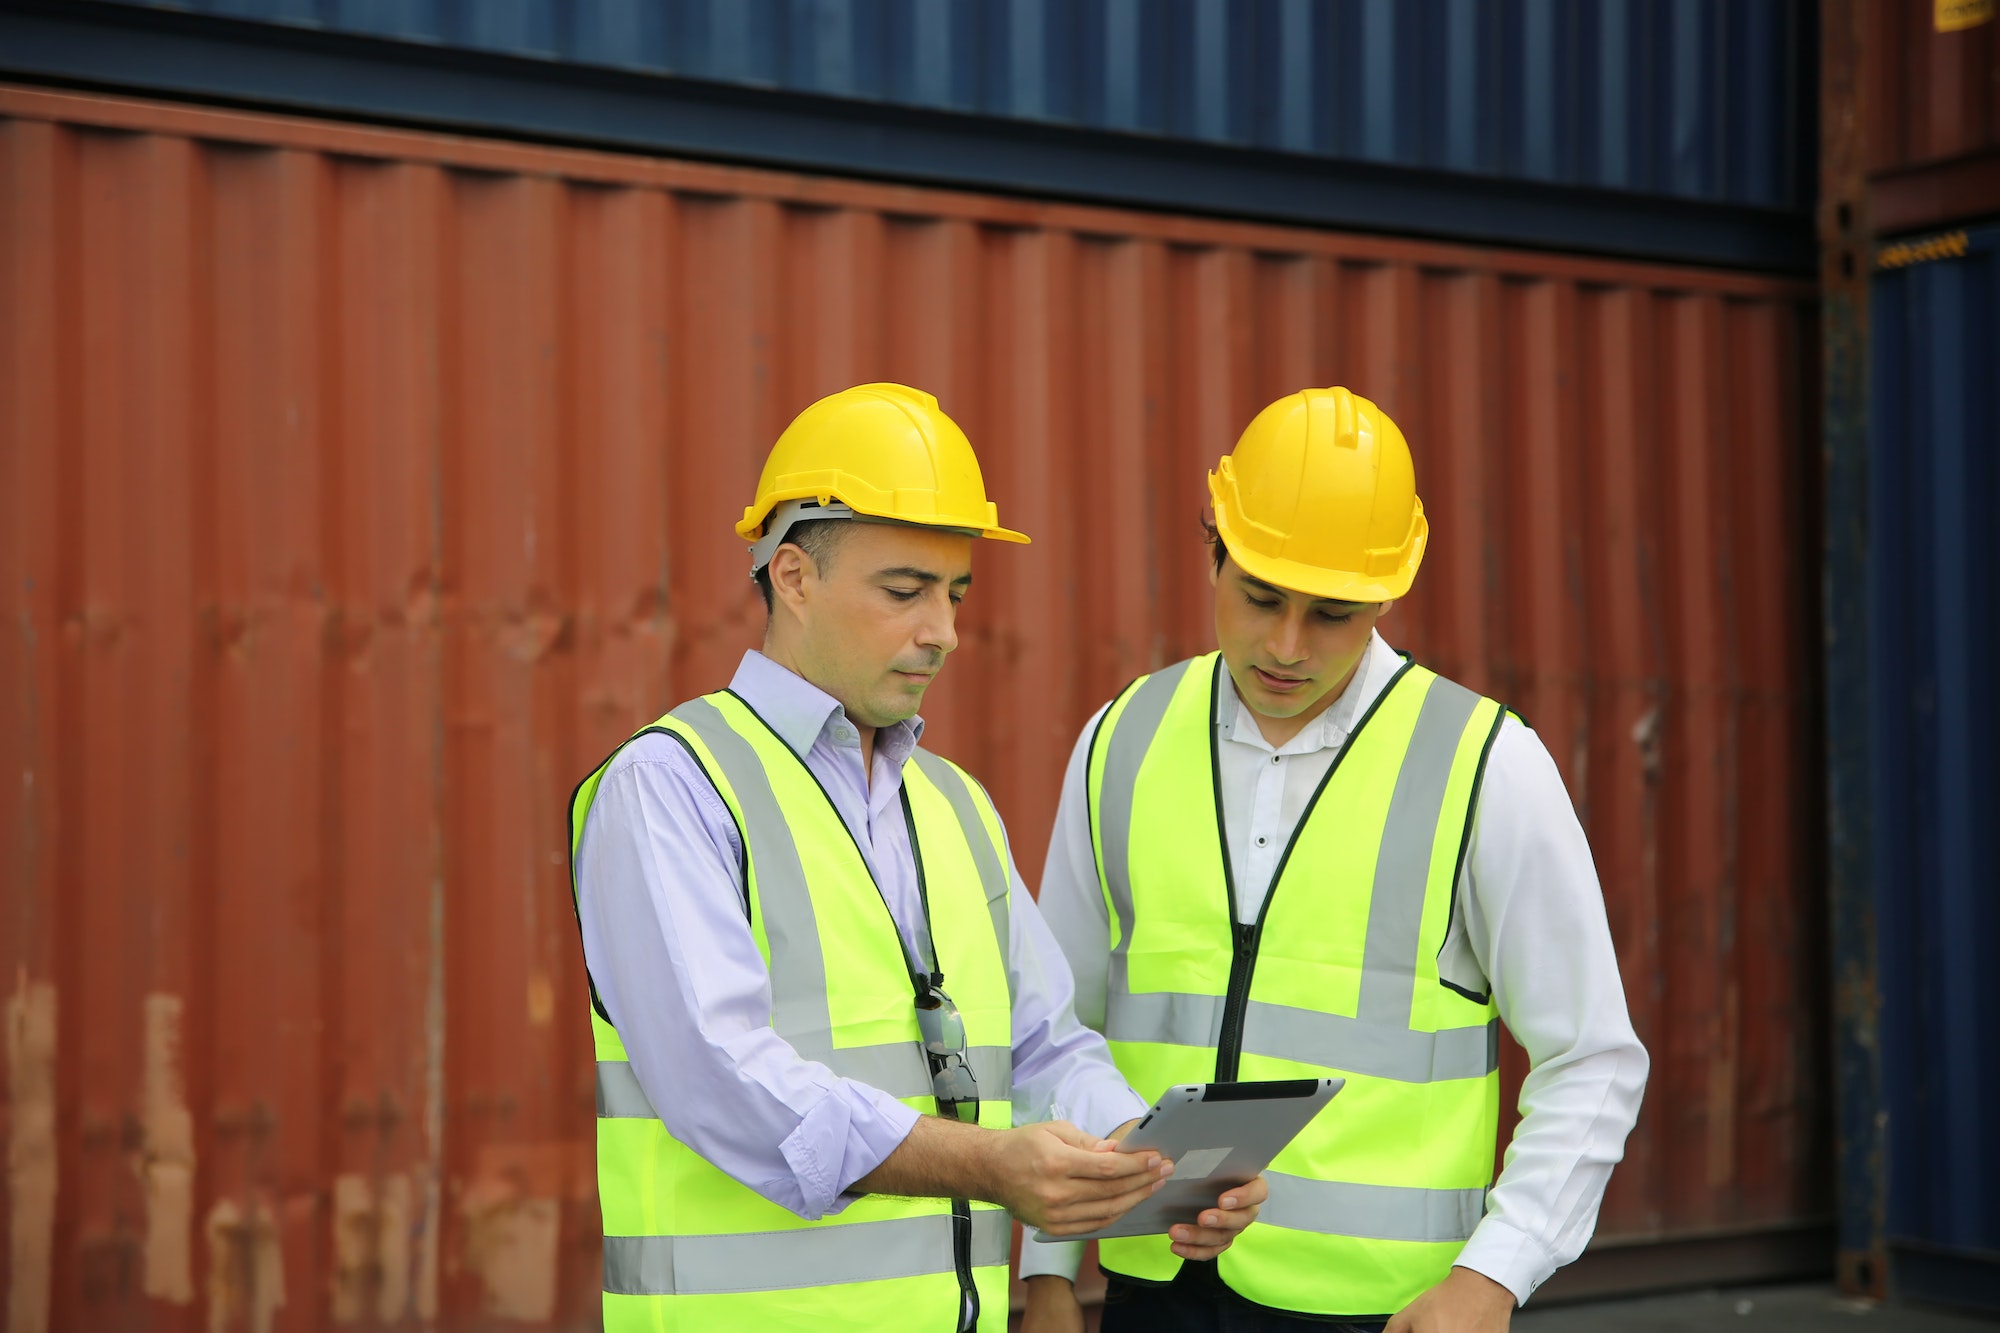 Logistics engineer control at the port, loading containers for trucks export and importing logistic